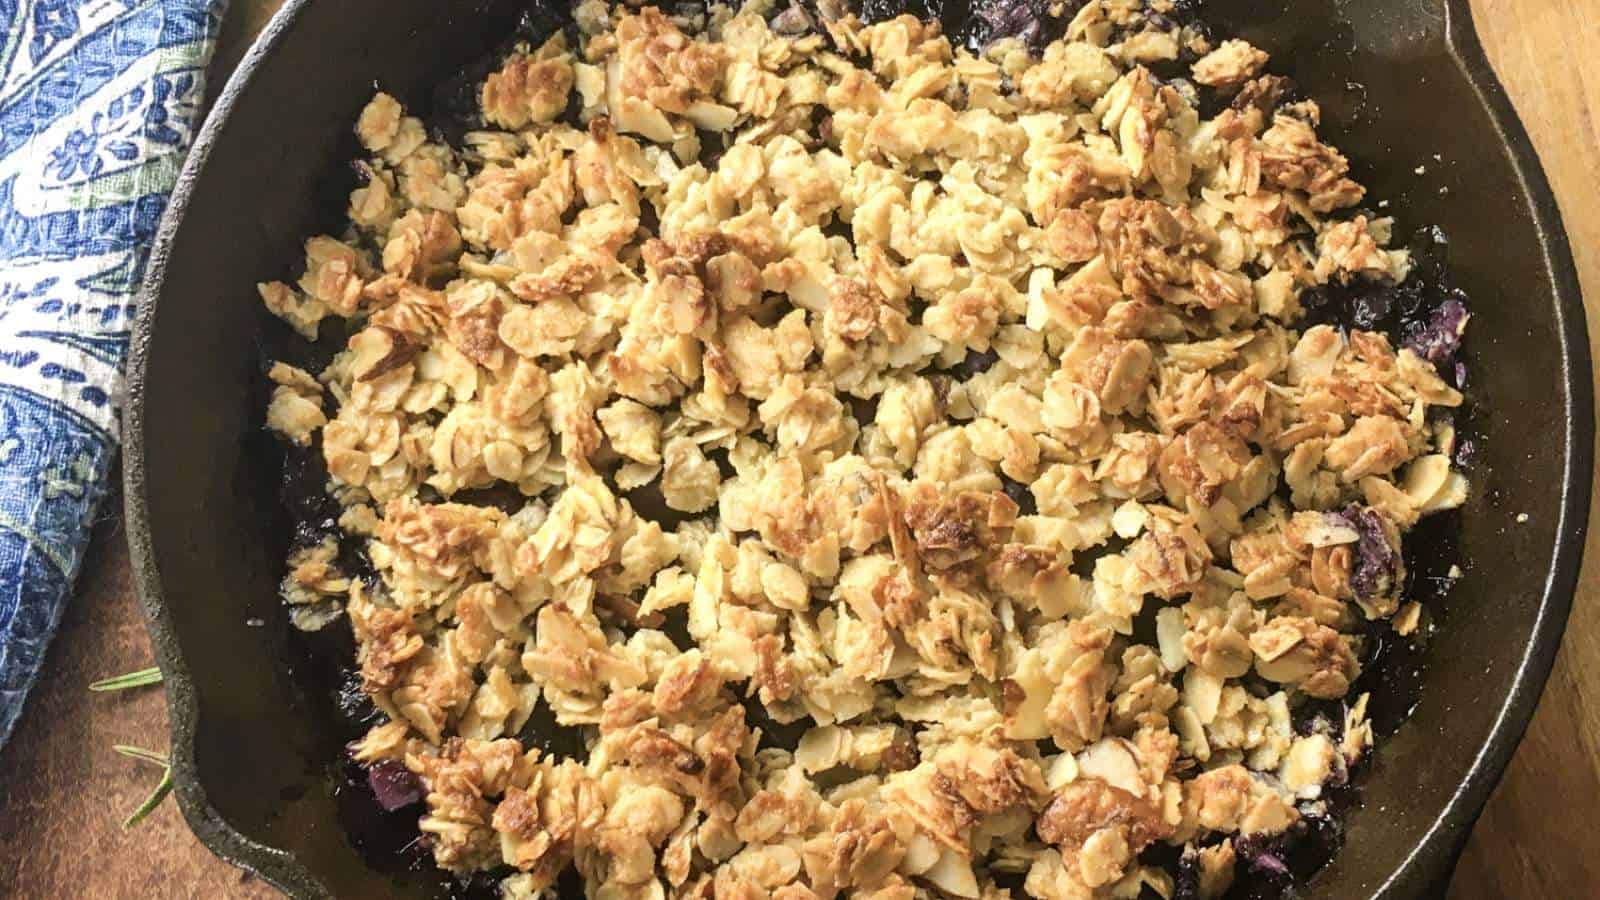 Blueberry crisp in a cast iron skillet.